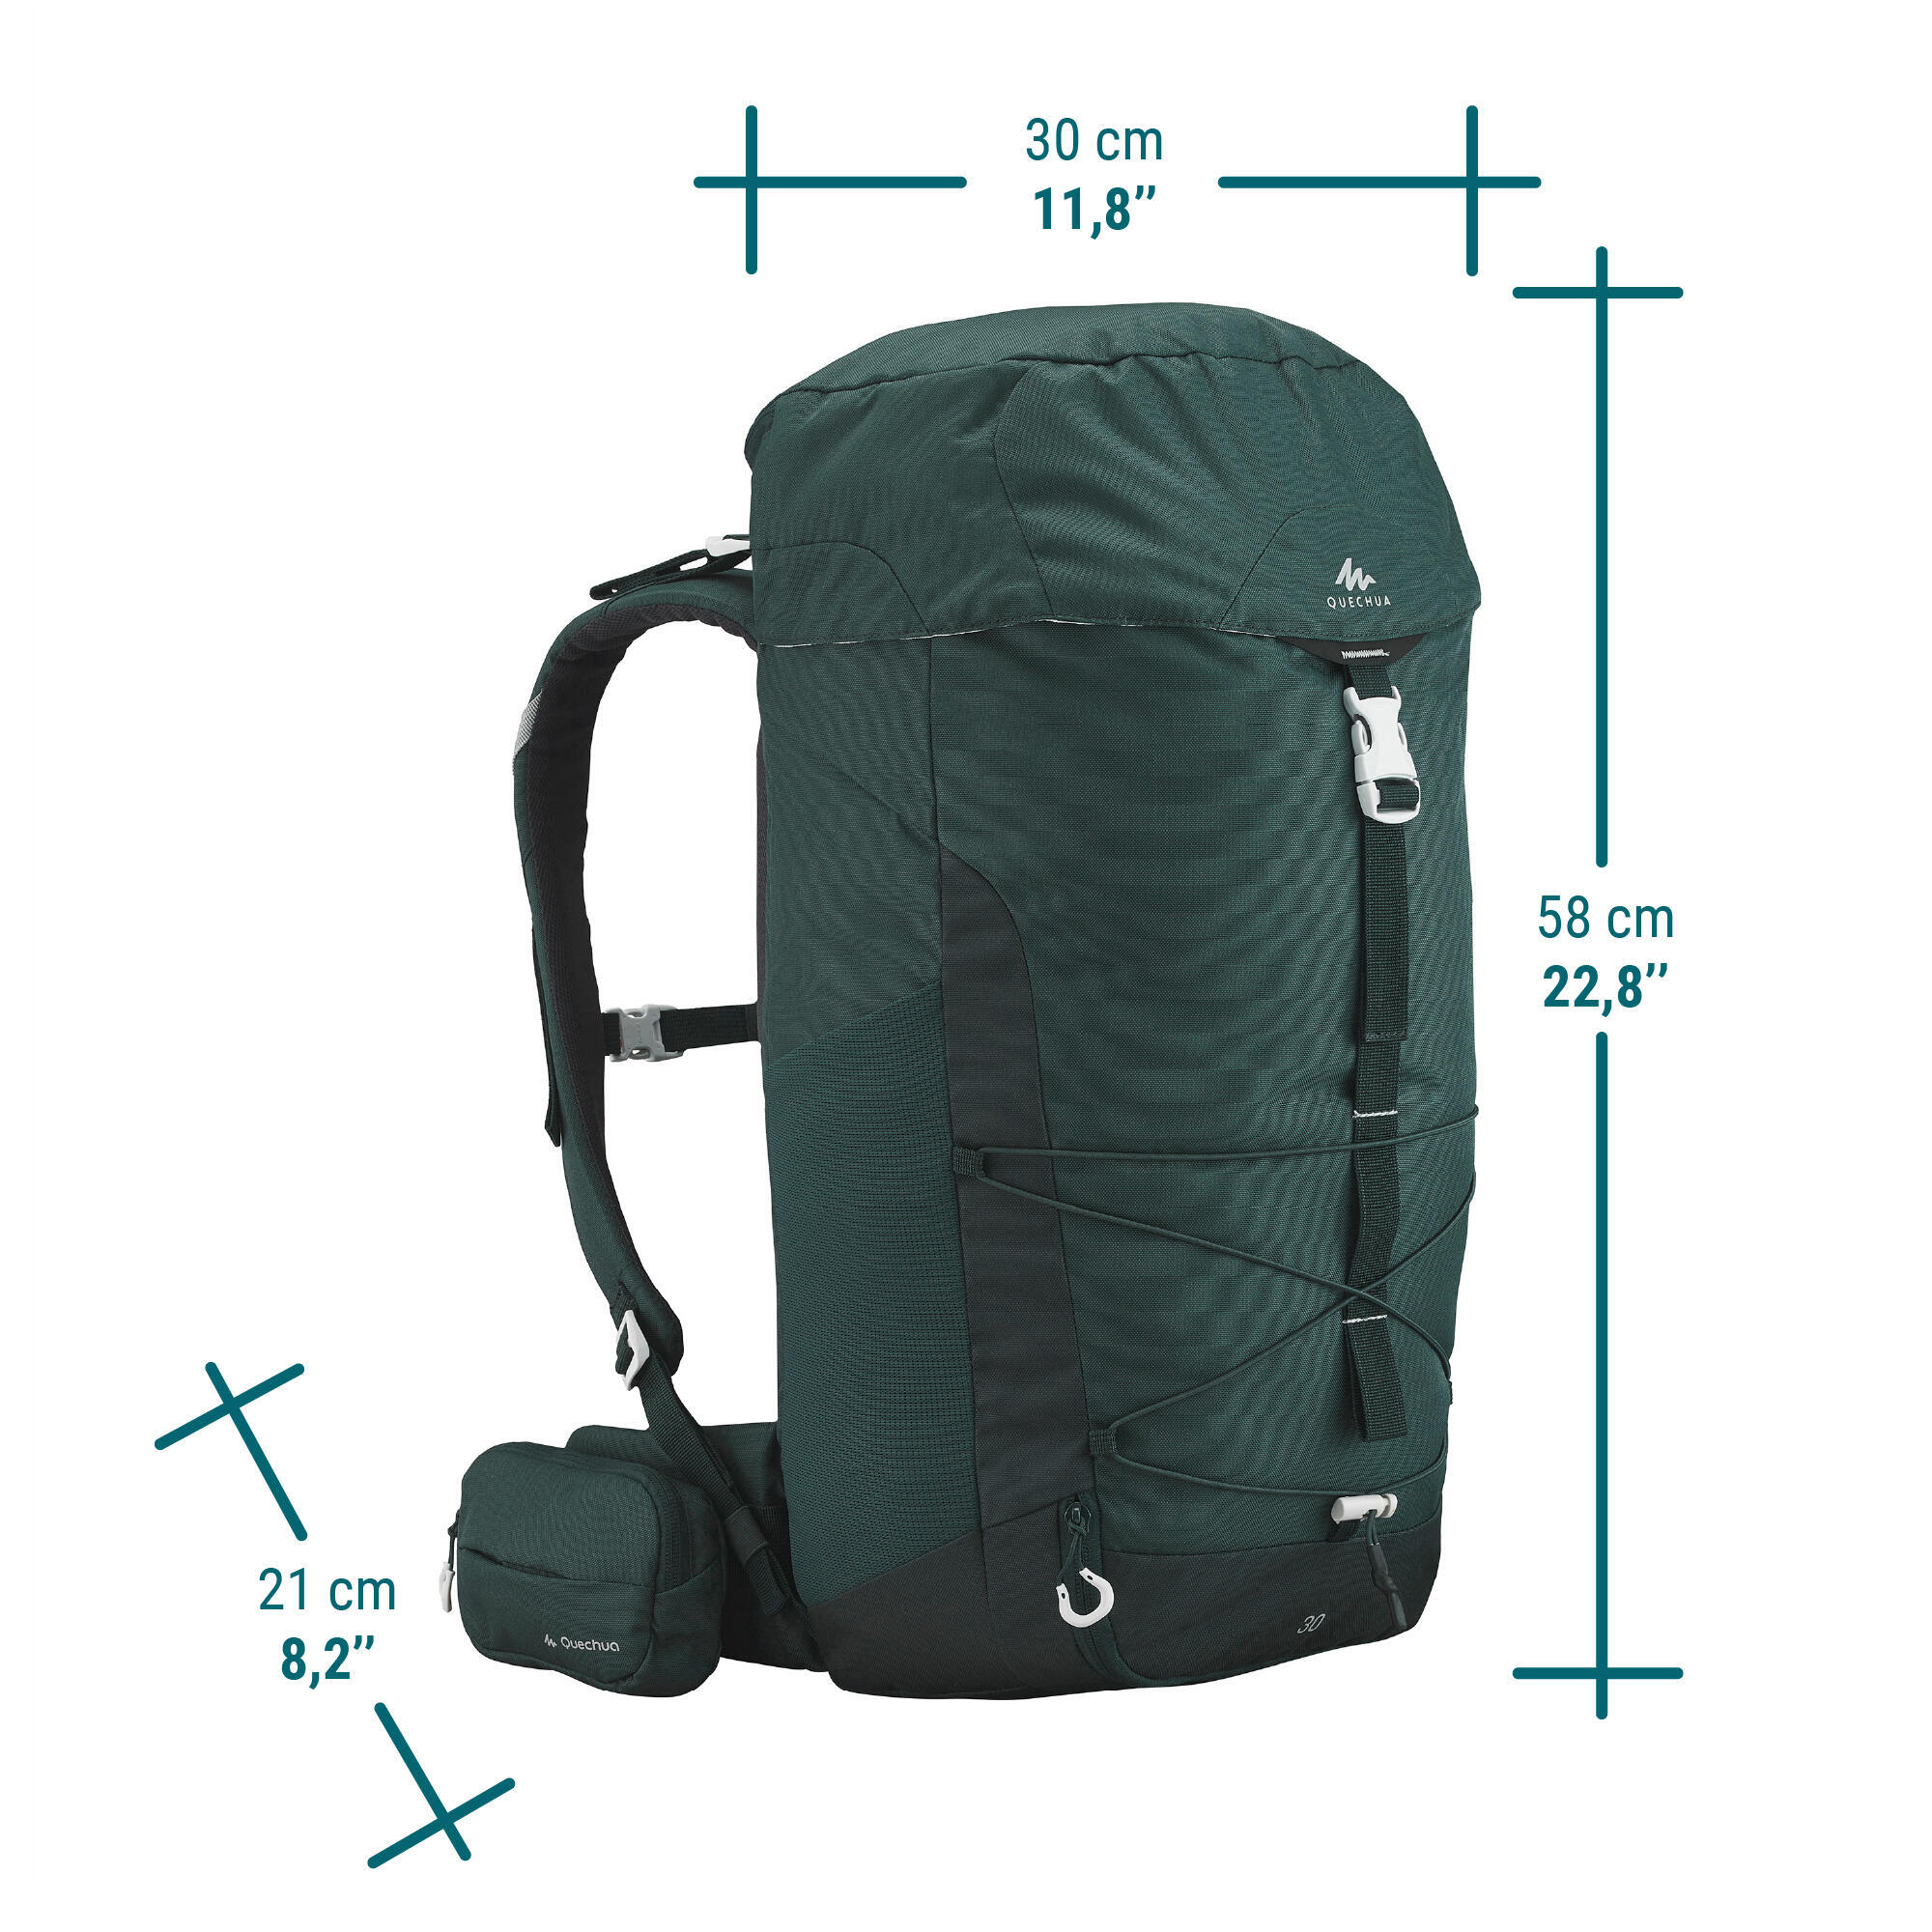 Mountain hiking backpack 30L - MH100 2/11